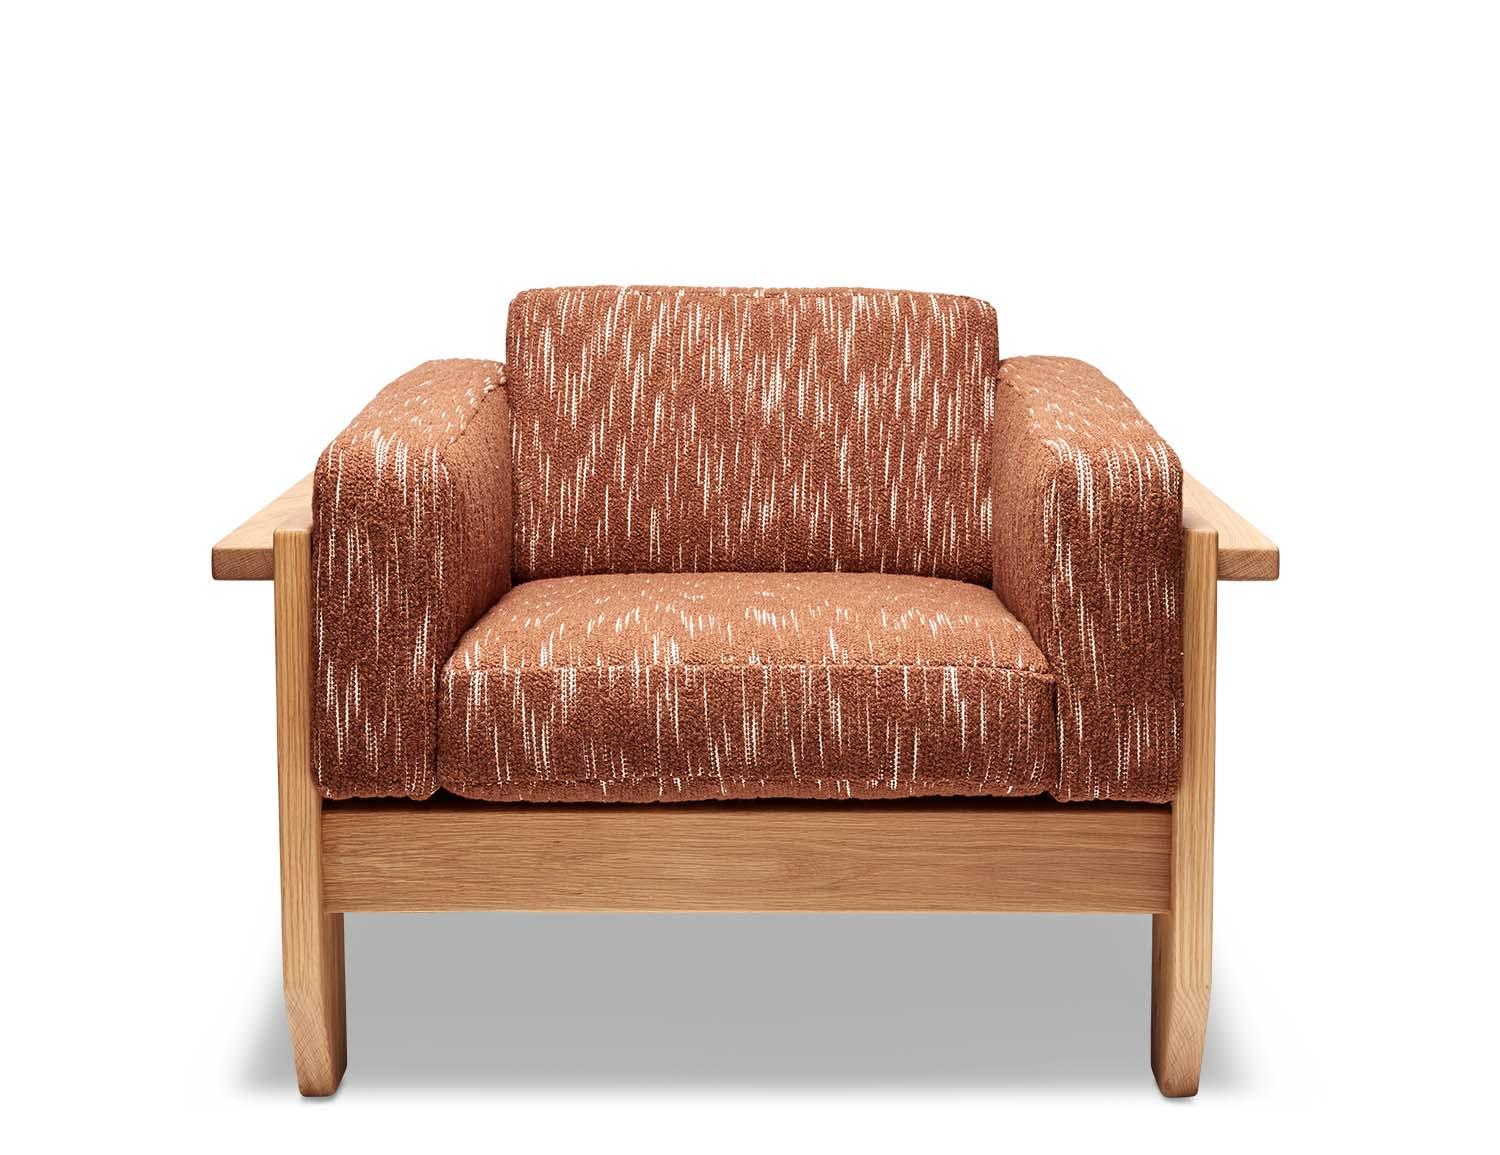 Portola lounge chair has a handcrafted solid wood frame with loose cushions. A matching ottoman is also available.

The Lawson-Fenning Collection is designed and handmade in Los Angeles, California.
Message us to find out which finishes are